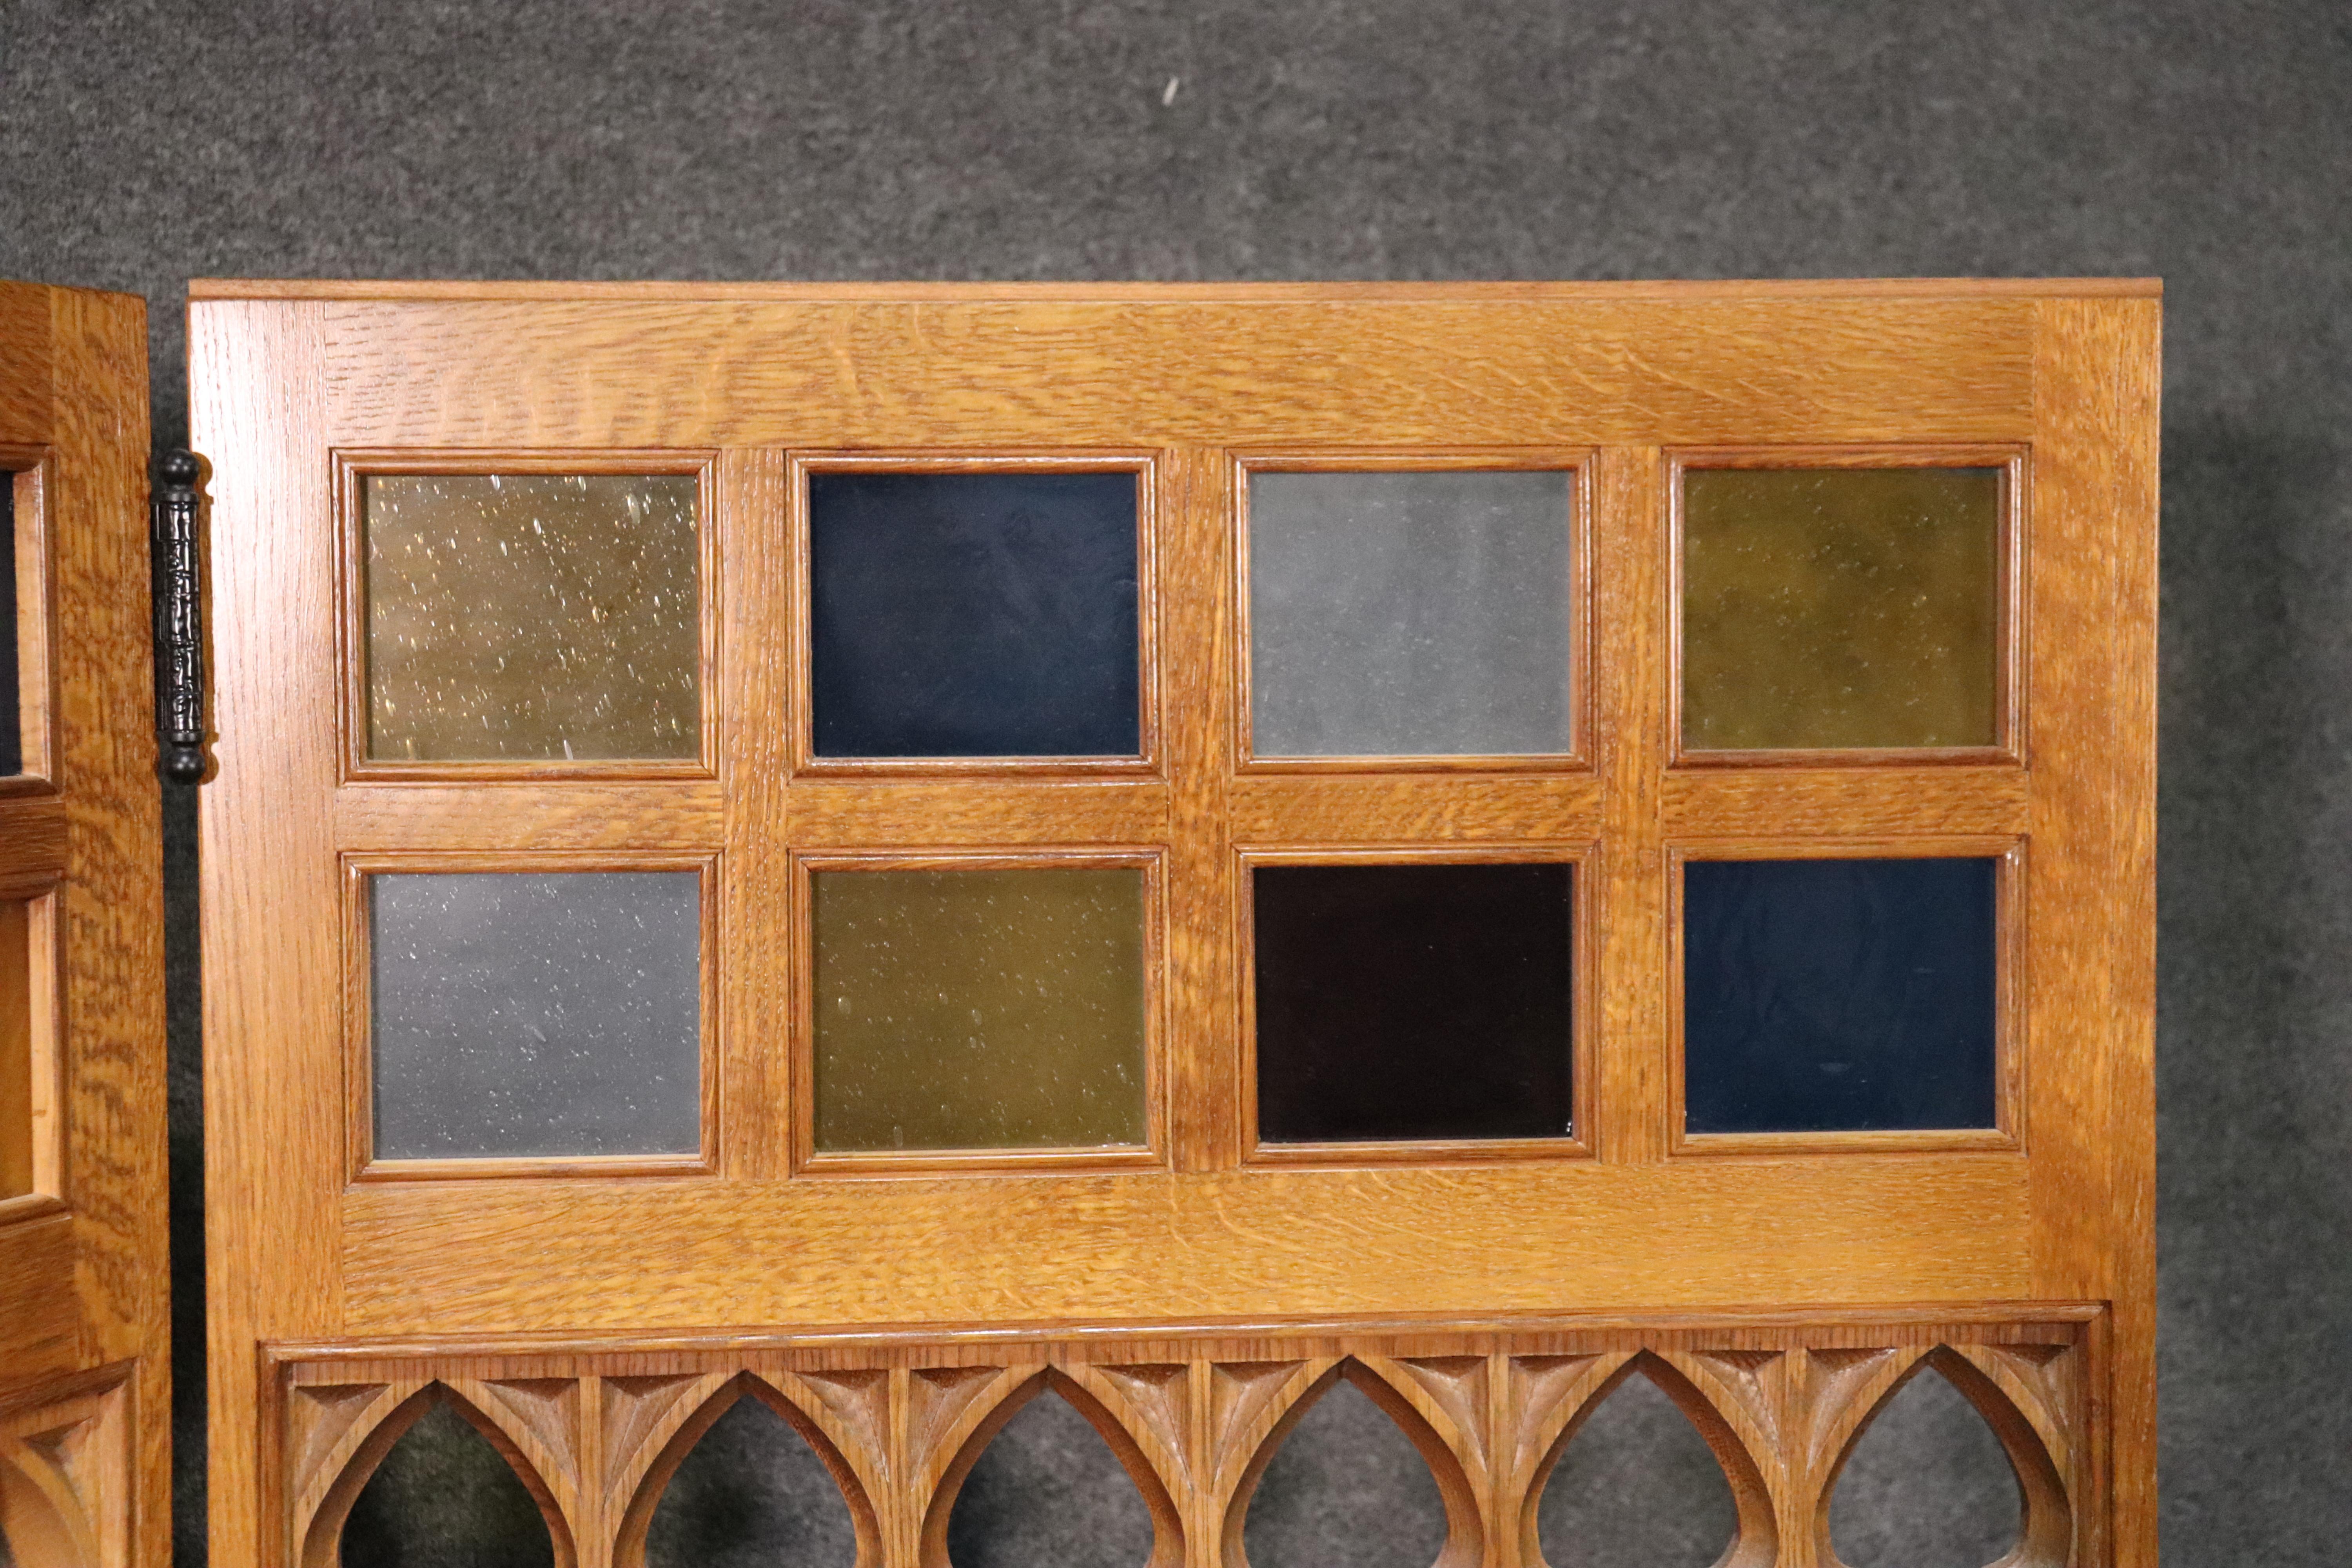 1 of 12 Stained Glass Solid Oak Gothic Panels Doors Architectural Elements 5